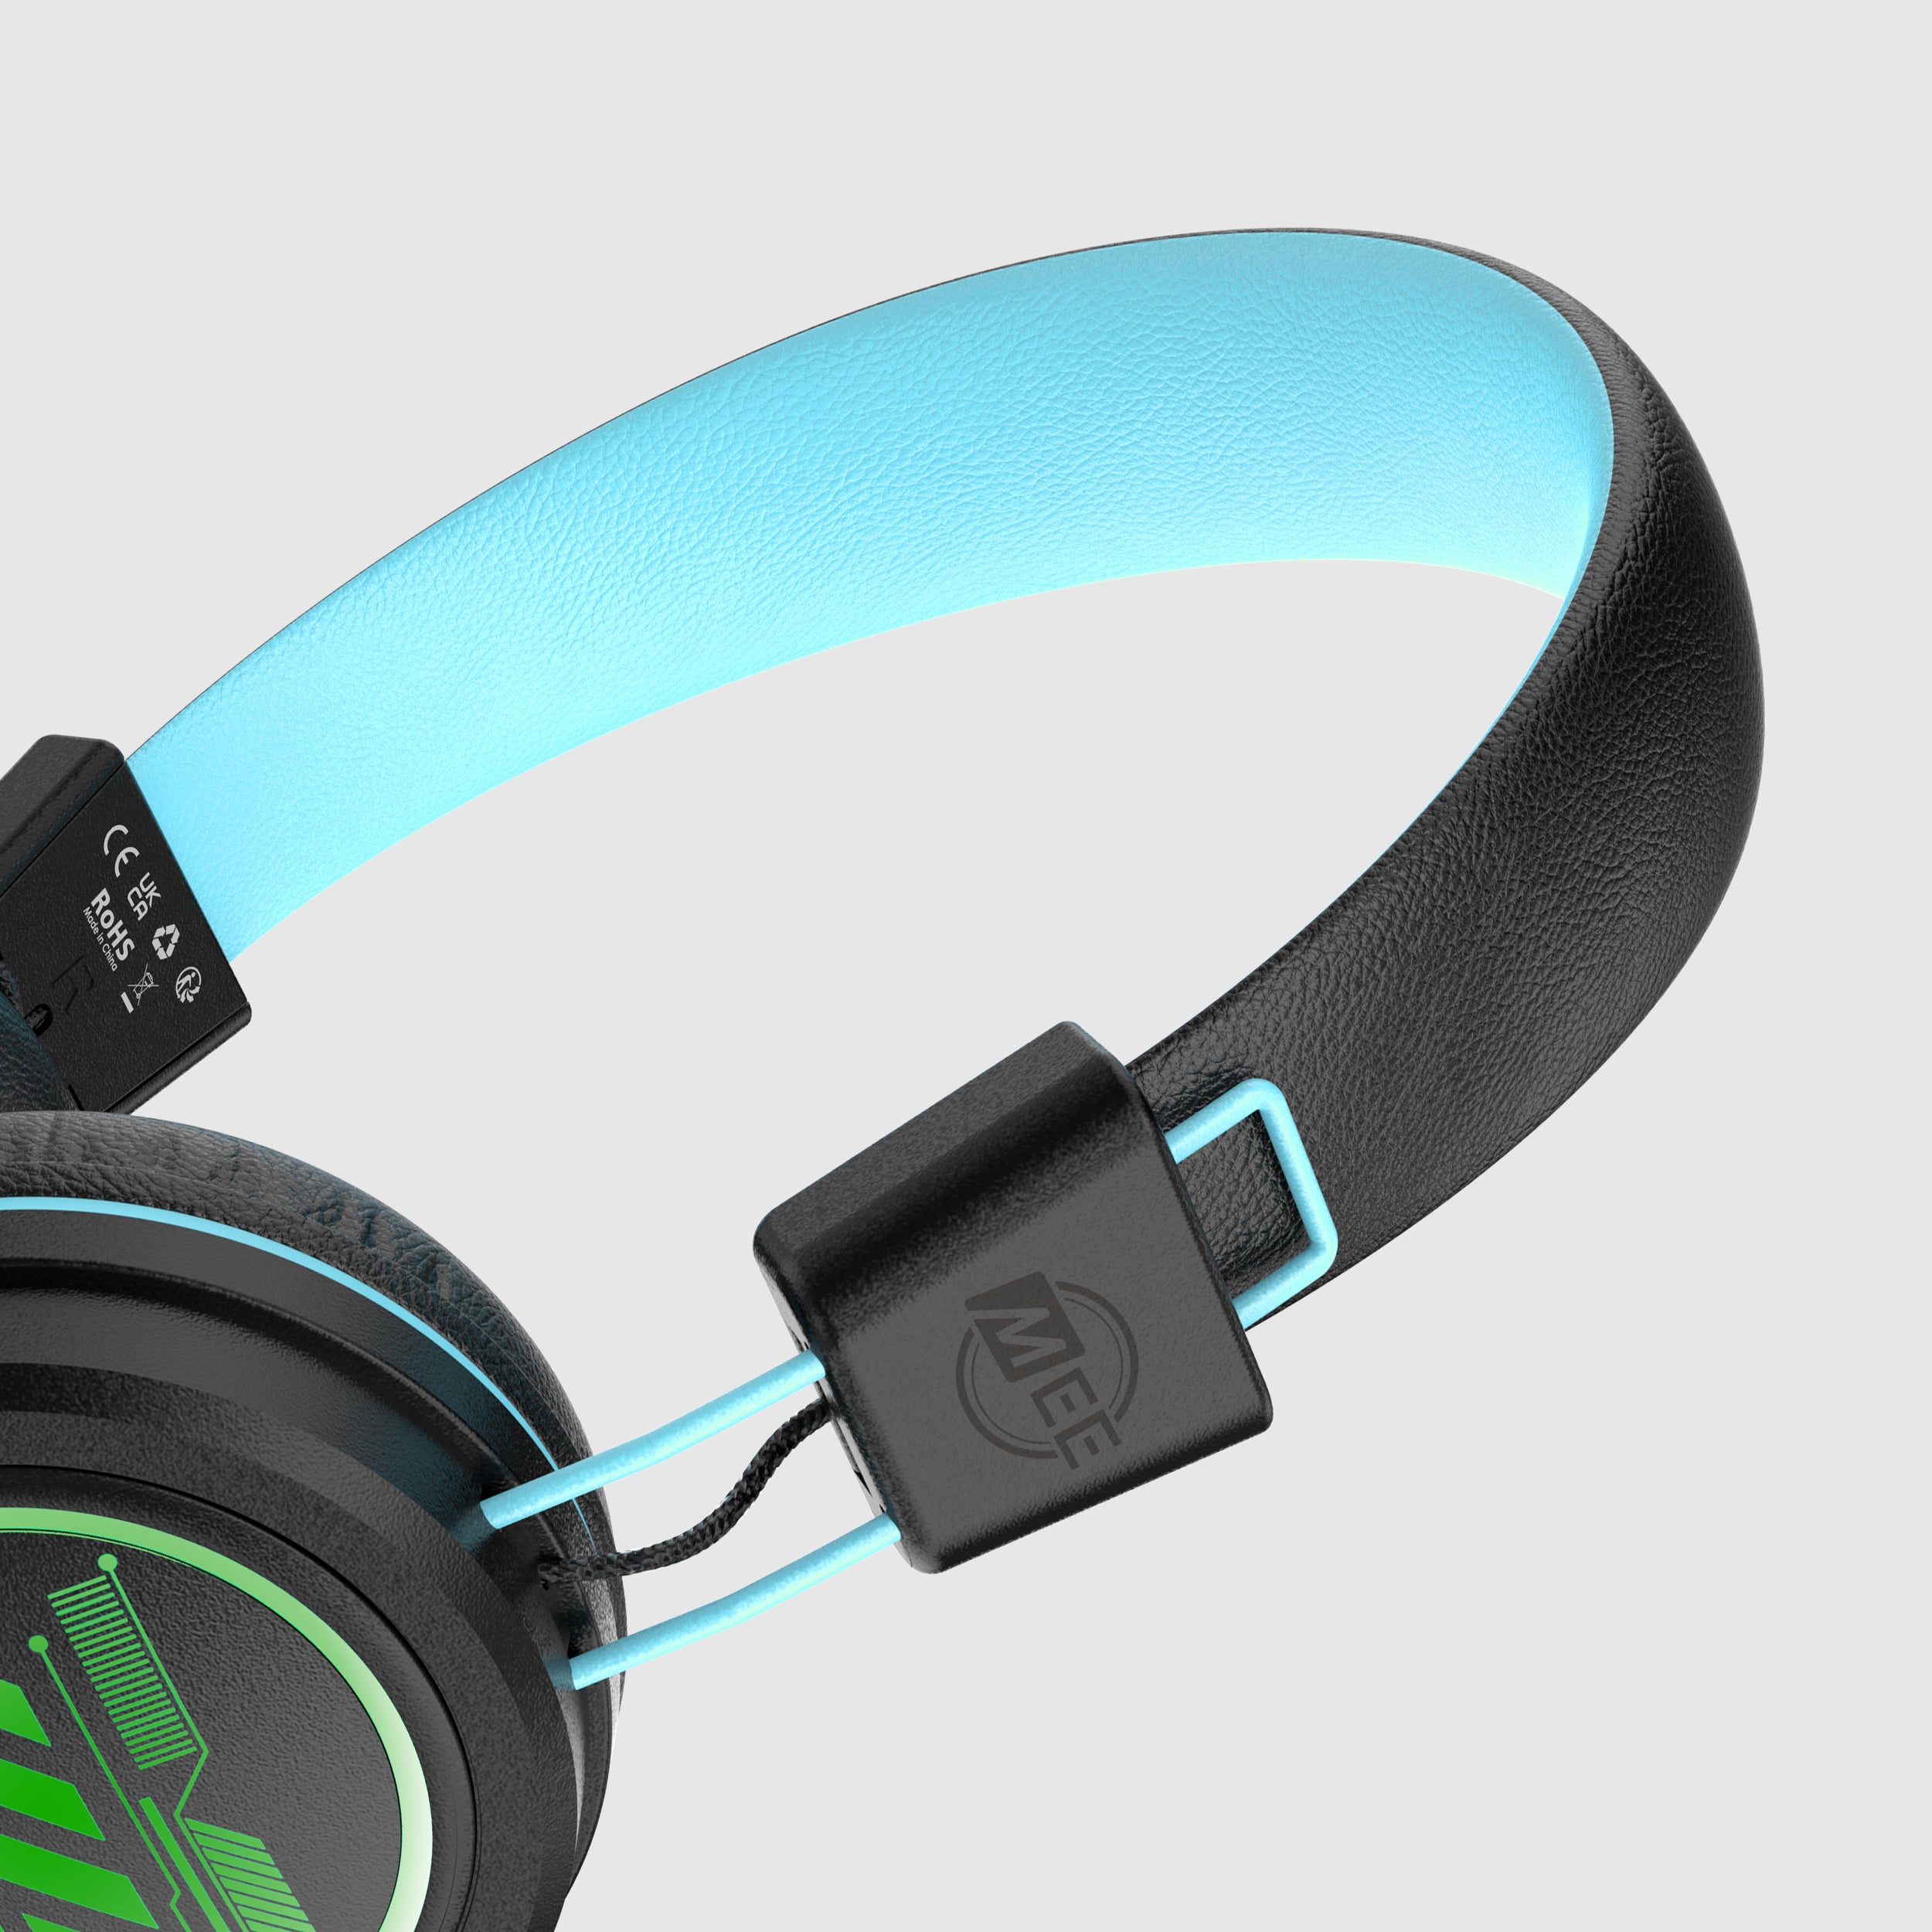 Close-up of the adjustable headband of a black and turquoise headset, highlighting the brand logo 'me' on the connector and modern design.